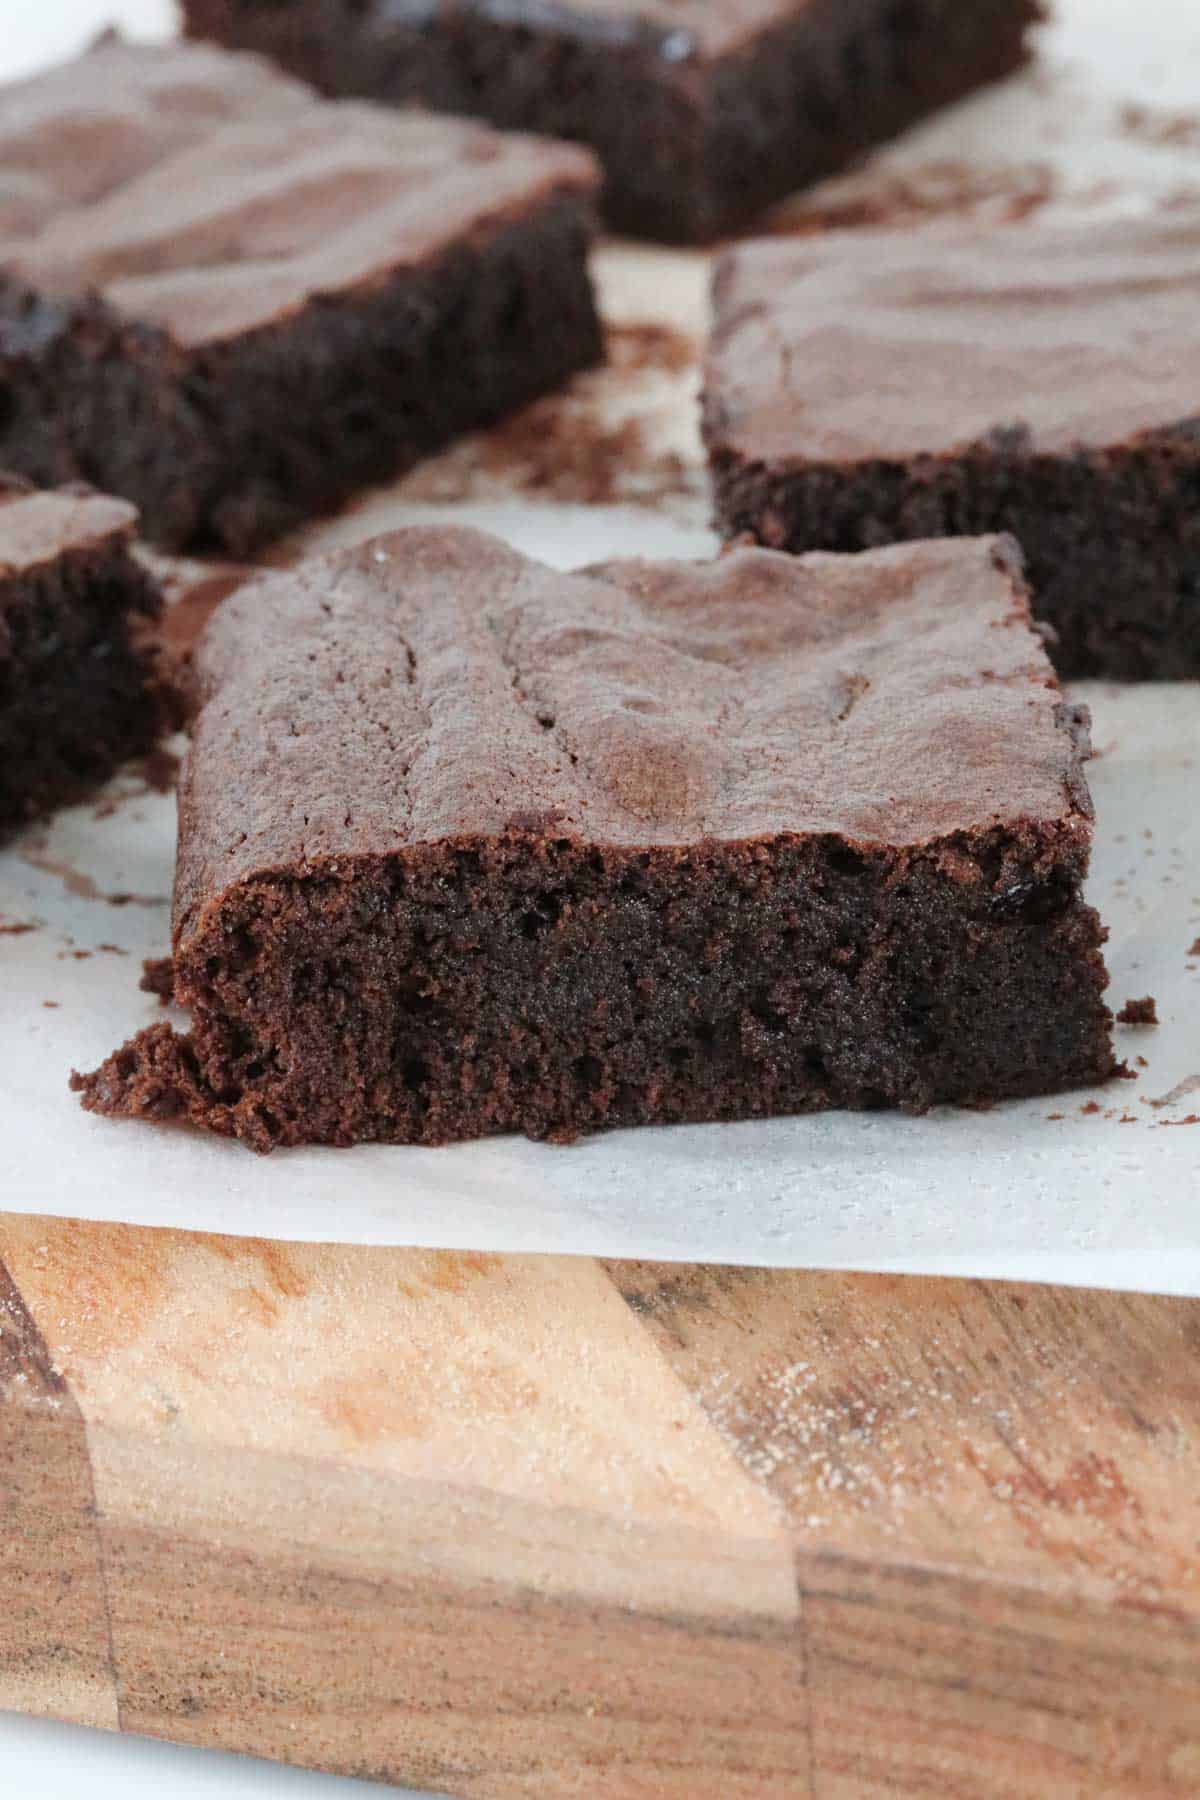 A rich square of chocolate brownie with a crusty top, resting on a wooden board.